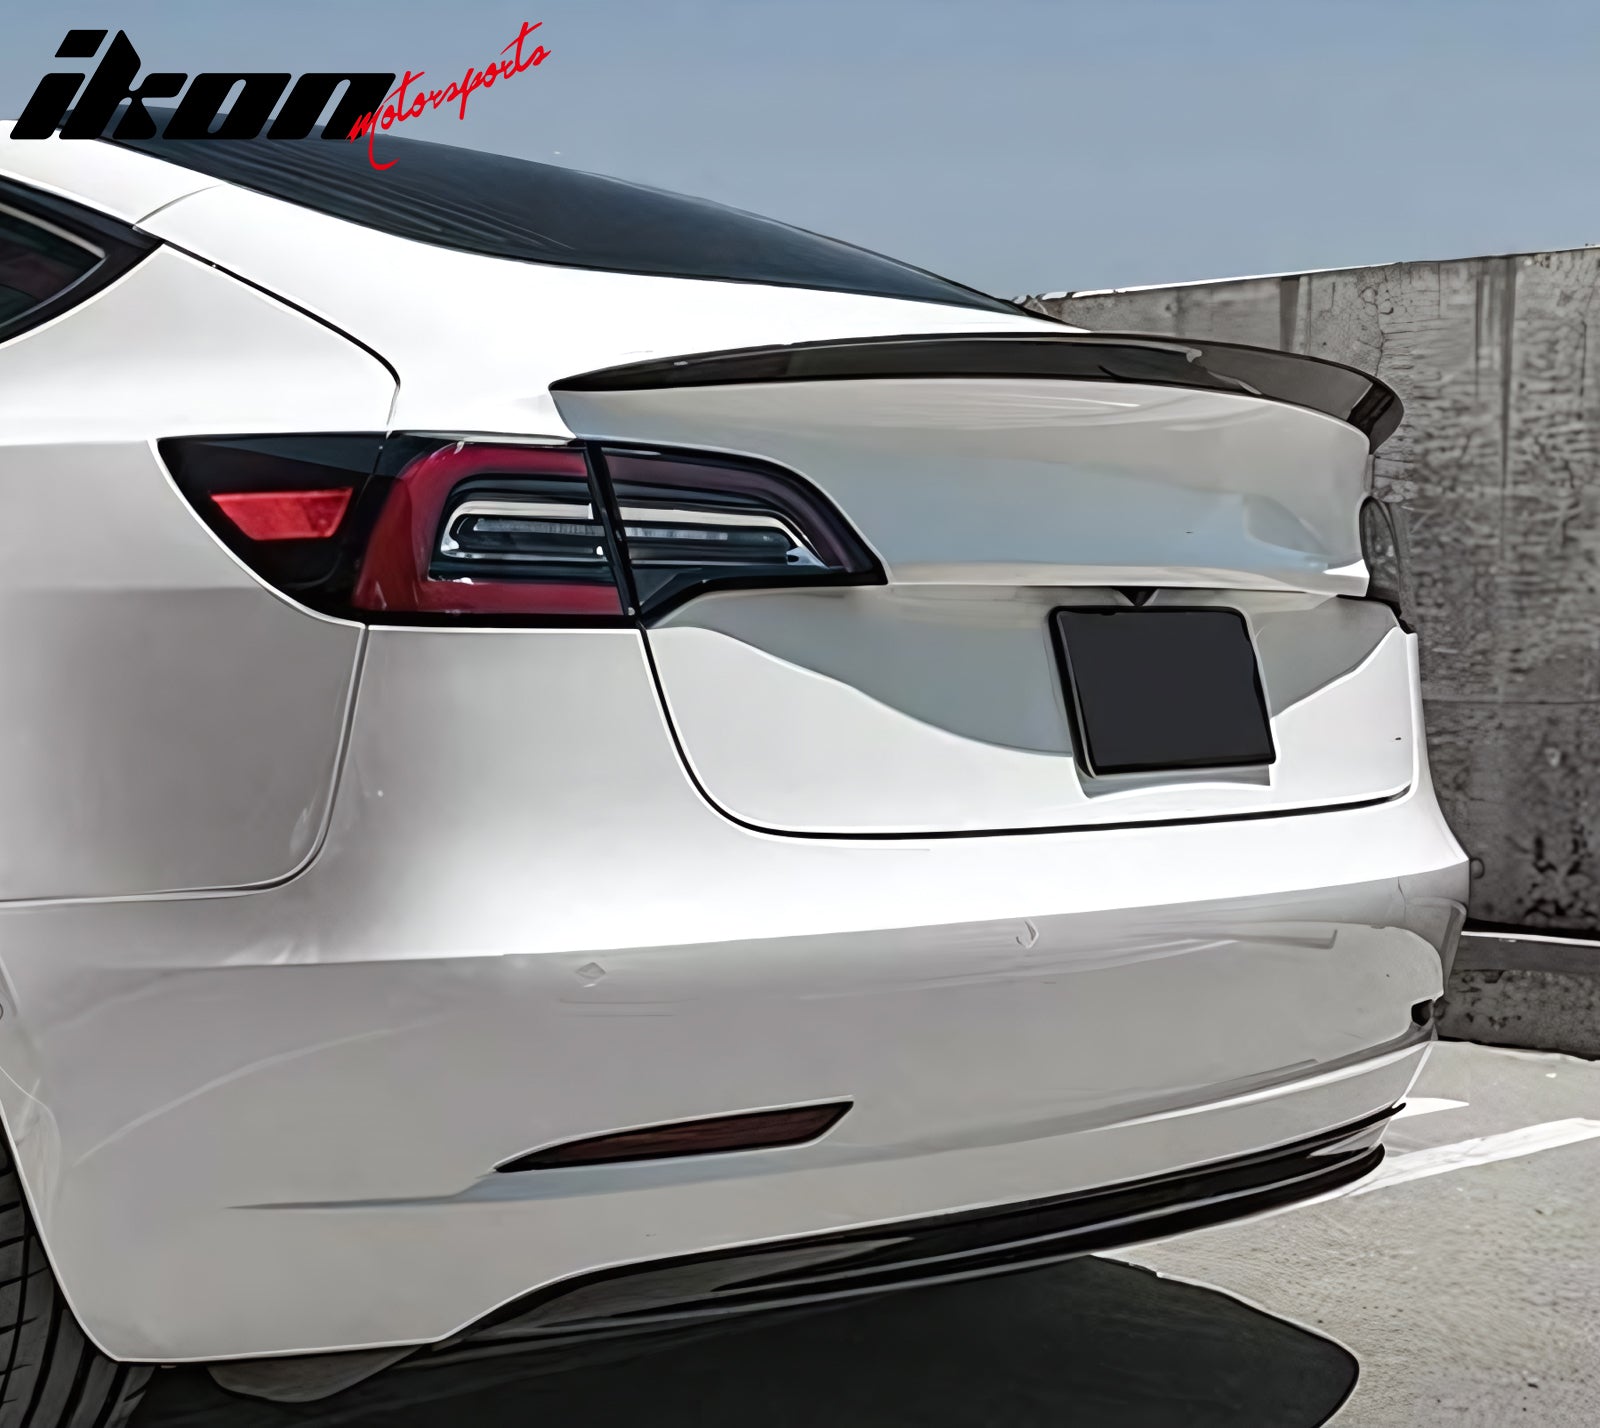 Shop Best Tesla Model 3 Auto Part Online at IKON with Great Price